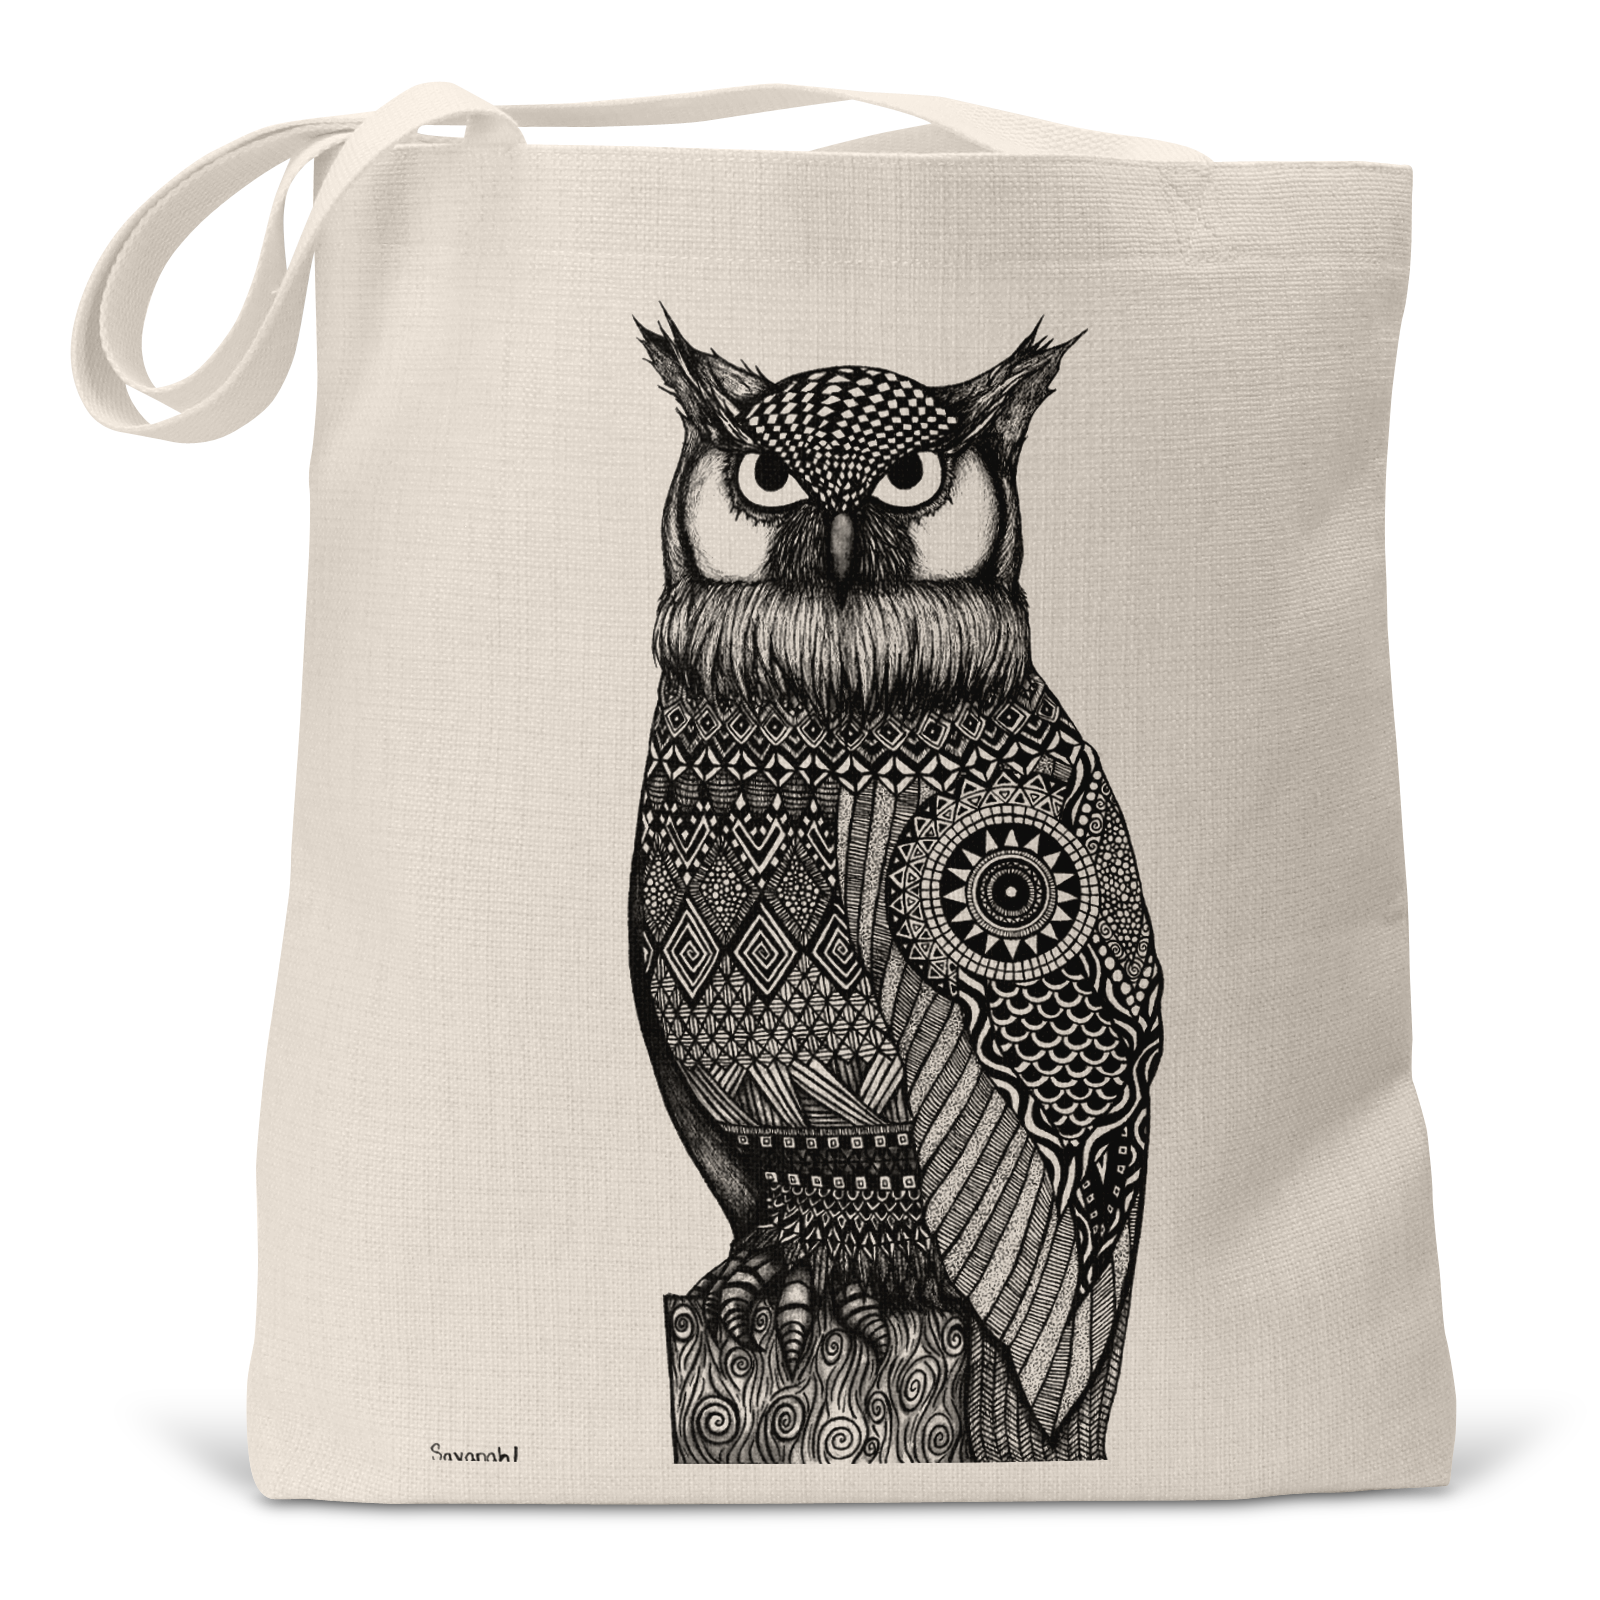 "Watcher" (Black/White Version) - Small/Large Linen Tote